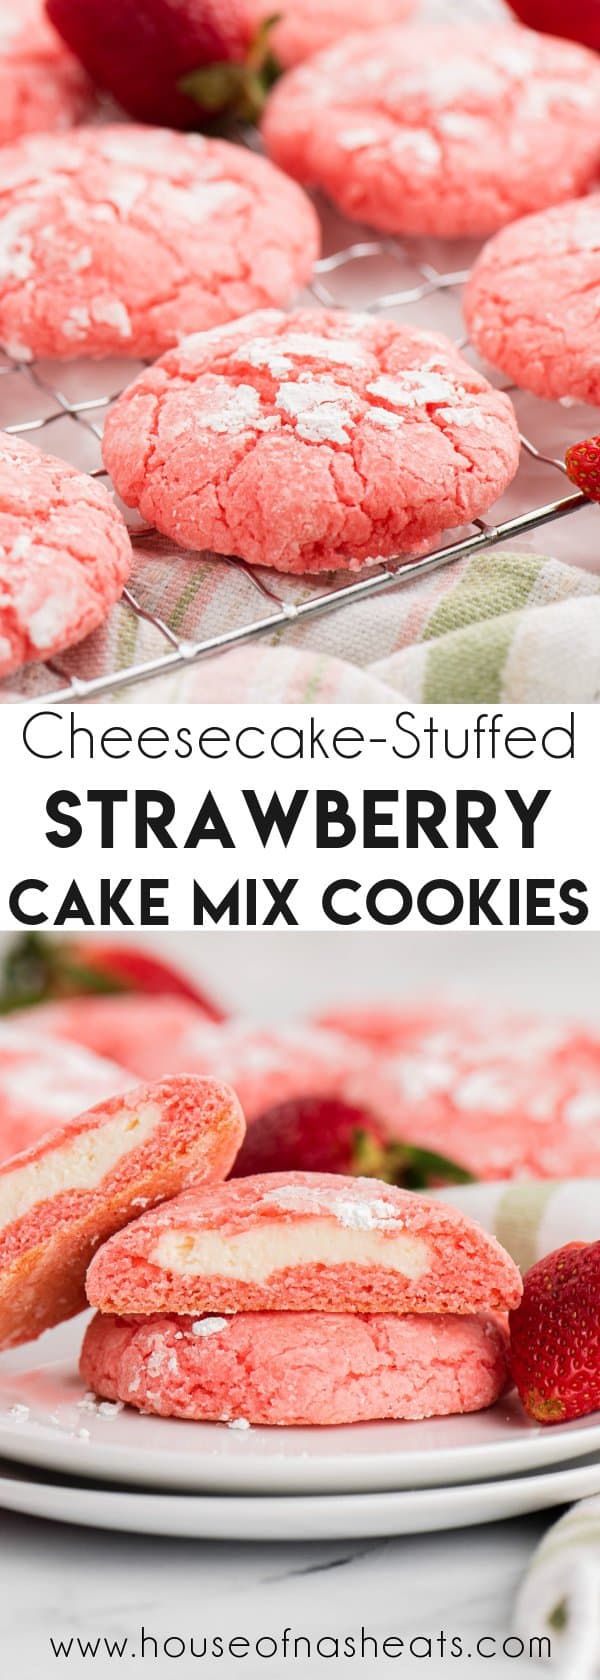 A collage of images of strawberry cake mix cookies with text overlay.